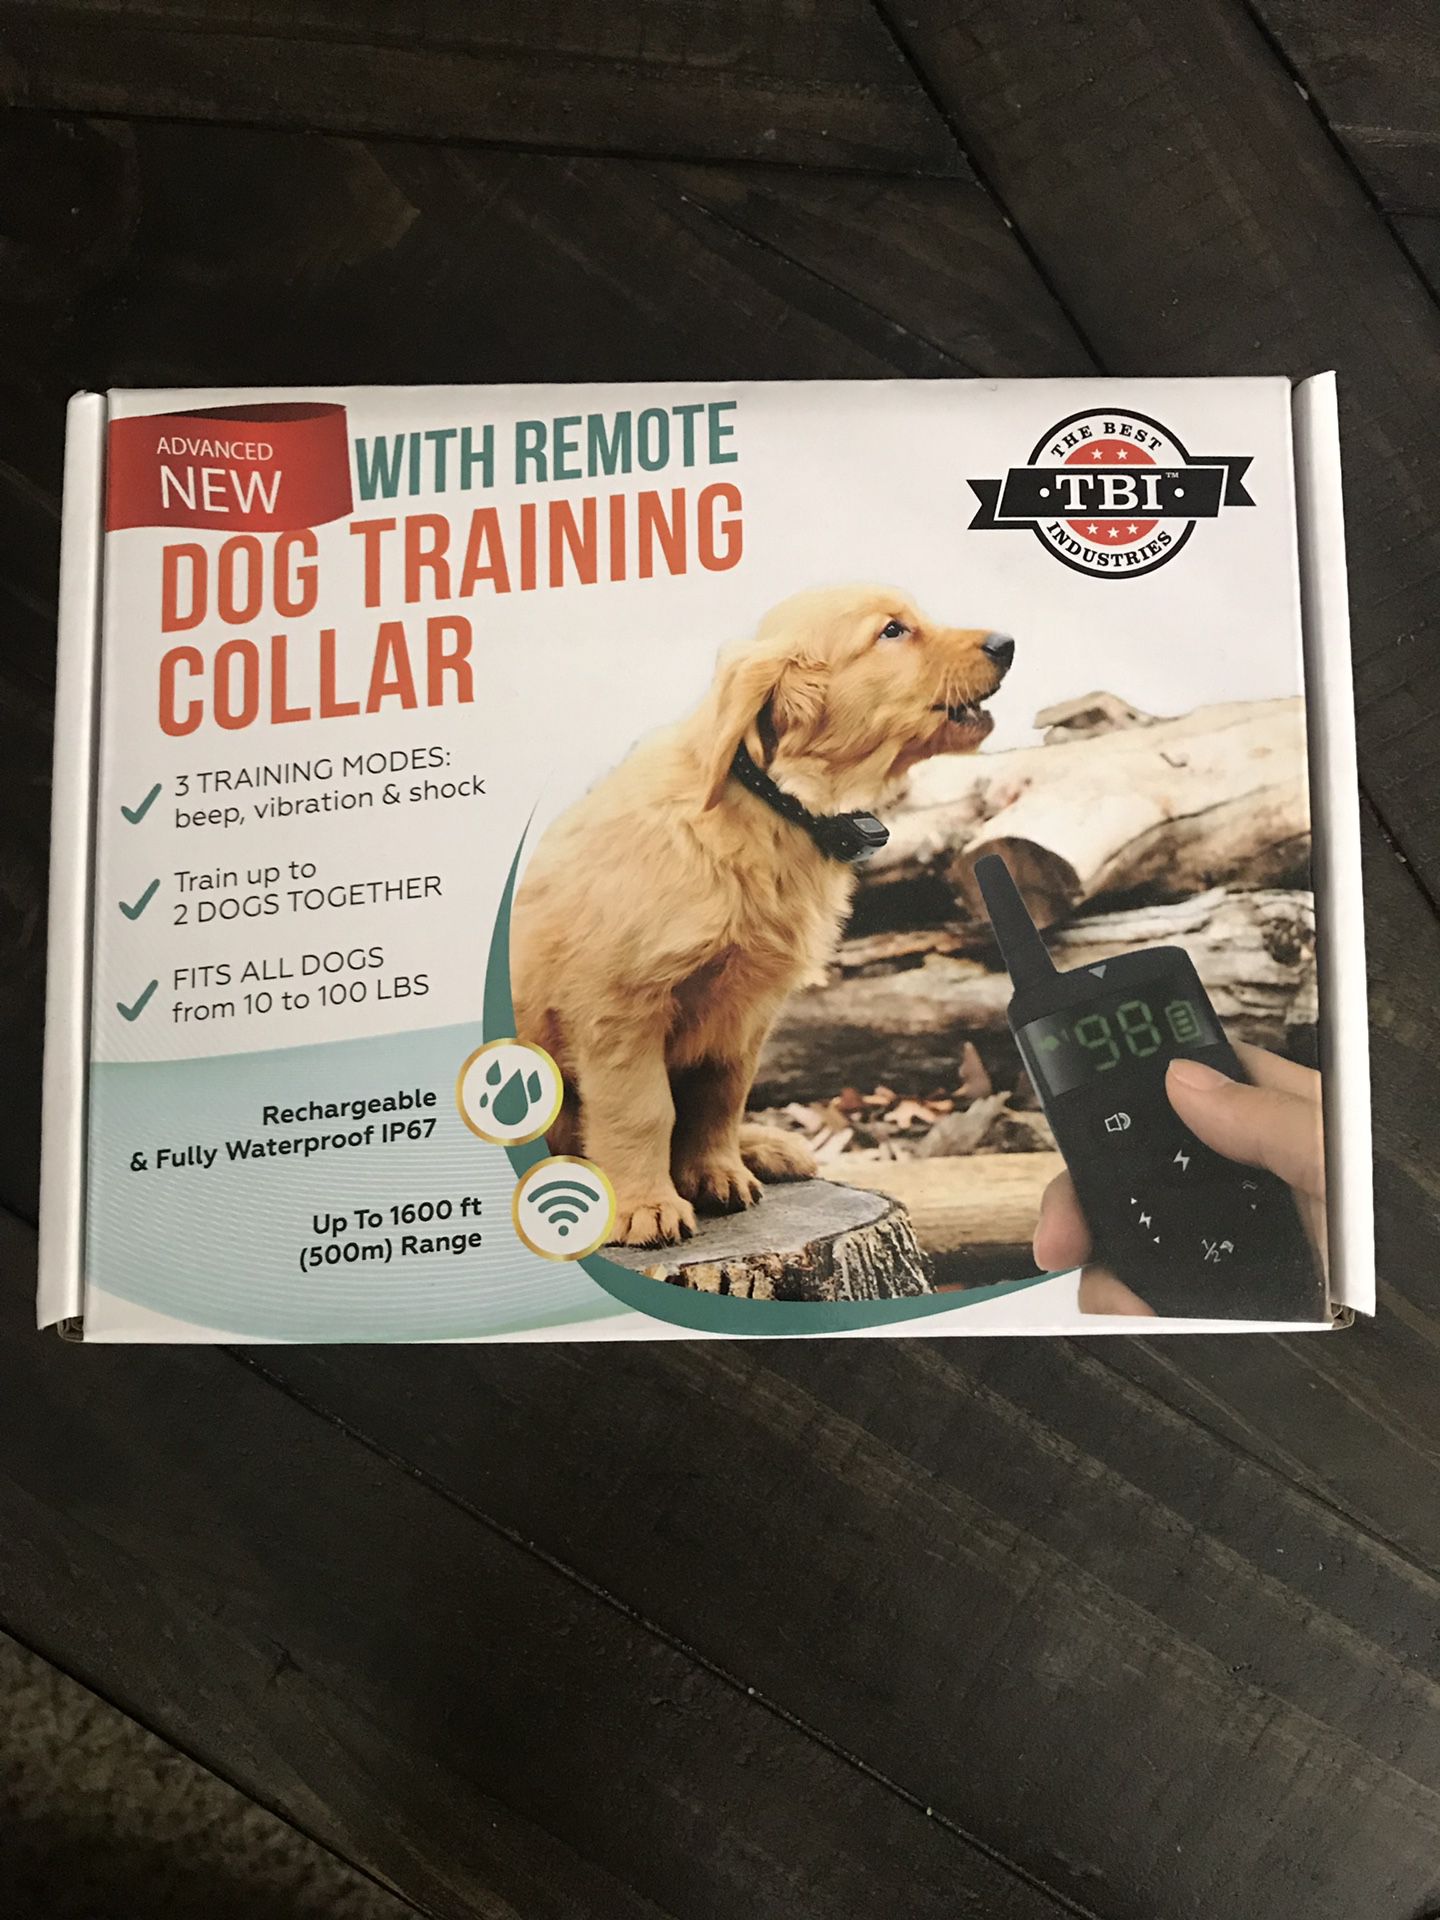 All-New 2019 Dog Training Collar with Remote | Long Range 1600 ft, Shock, Vibration Control, Rechargeable & IPX7 Waterproof | E-Collar Shock Collar f